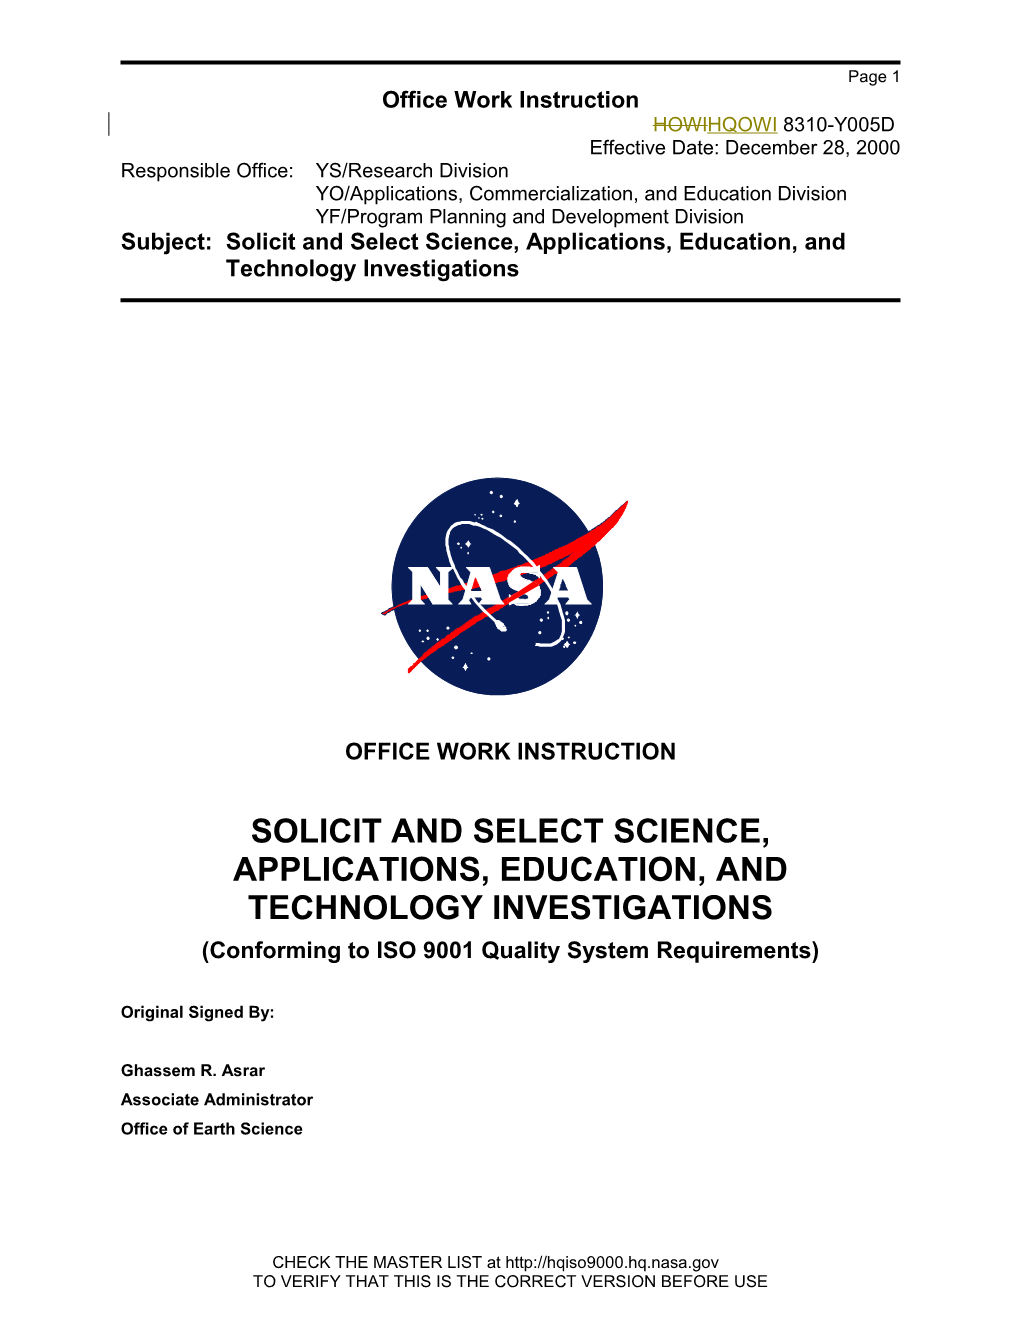 Solicit and Select Science, Applications, Education, and Technology Investigations